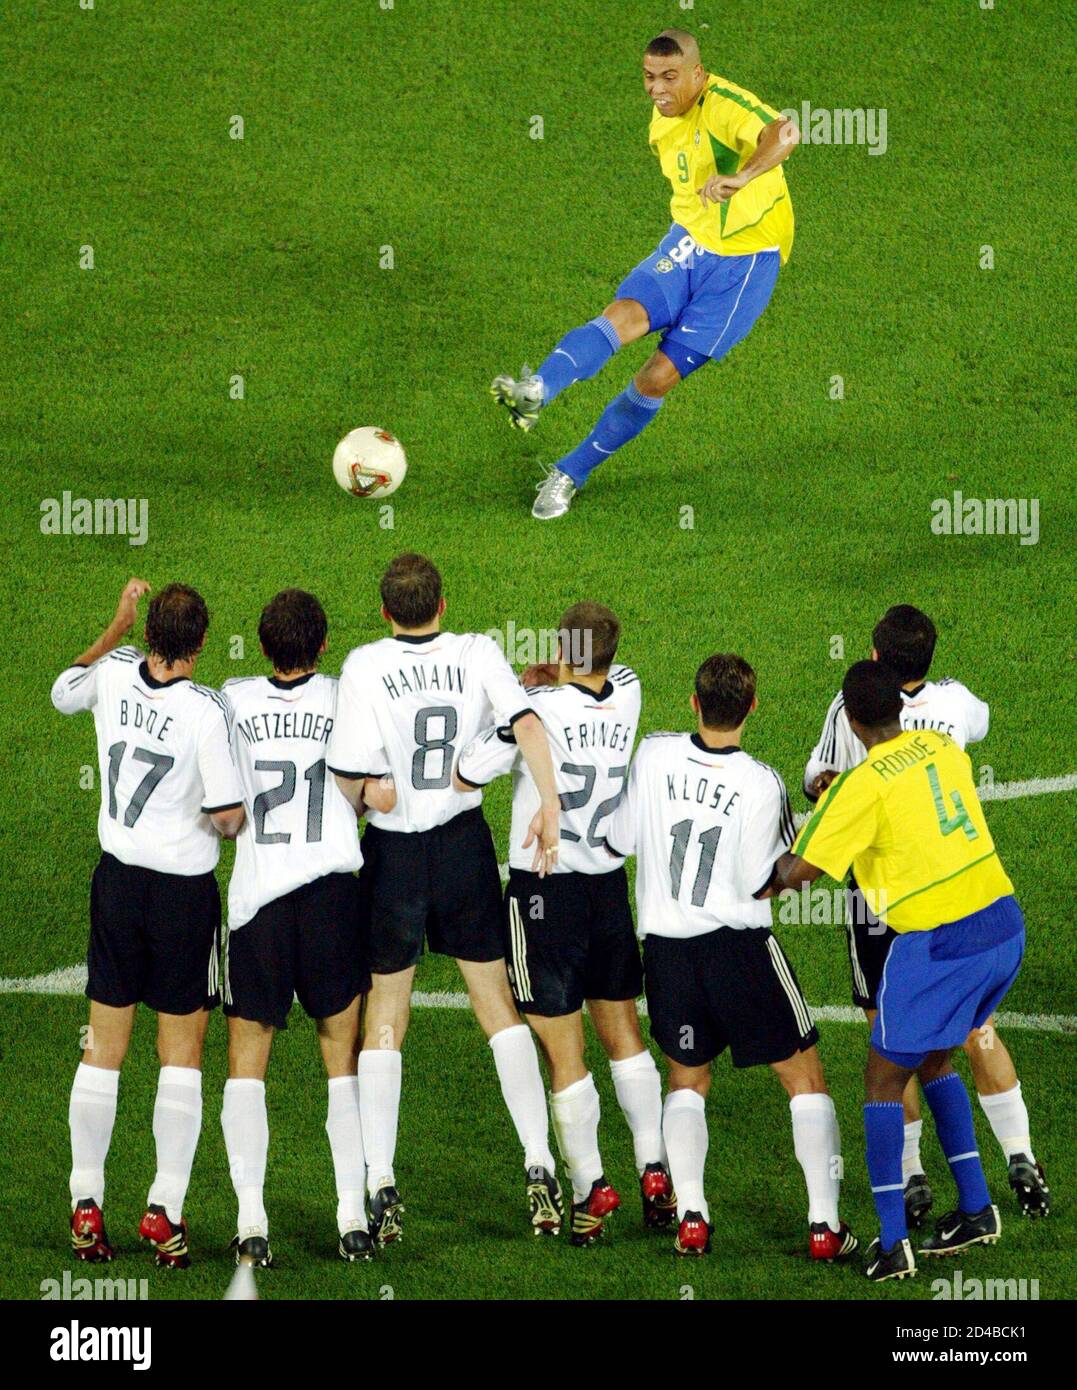 Brazil's Ronaldo (top) makes a free kick as Germany's (R-L) Jens Jeremies,  Miroslav Klose, Torsten Fings, Dietmar Hamann, Christoph Metzelder, and  Marco Bode defend their goal in the second half of their